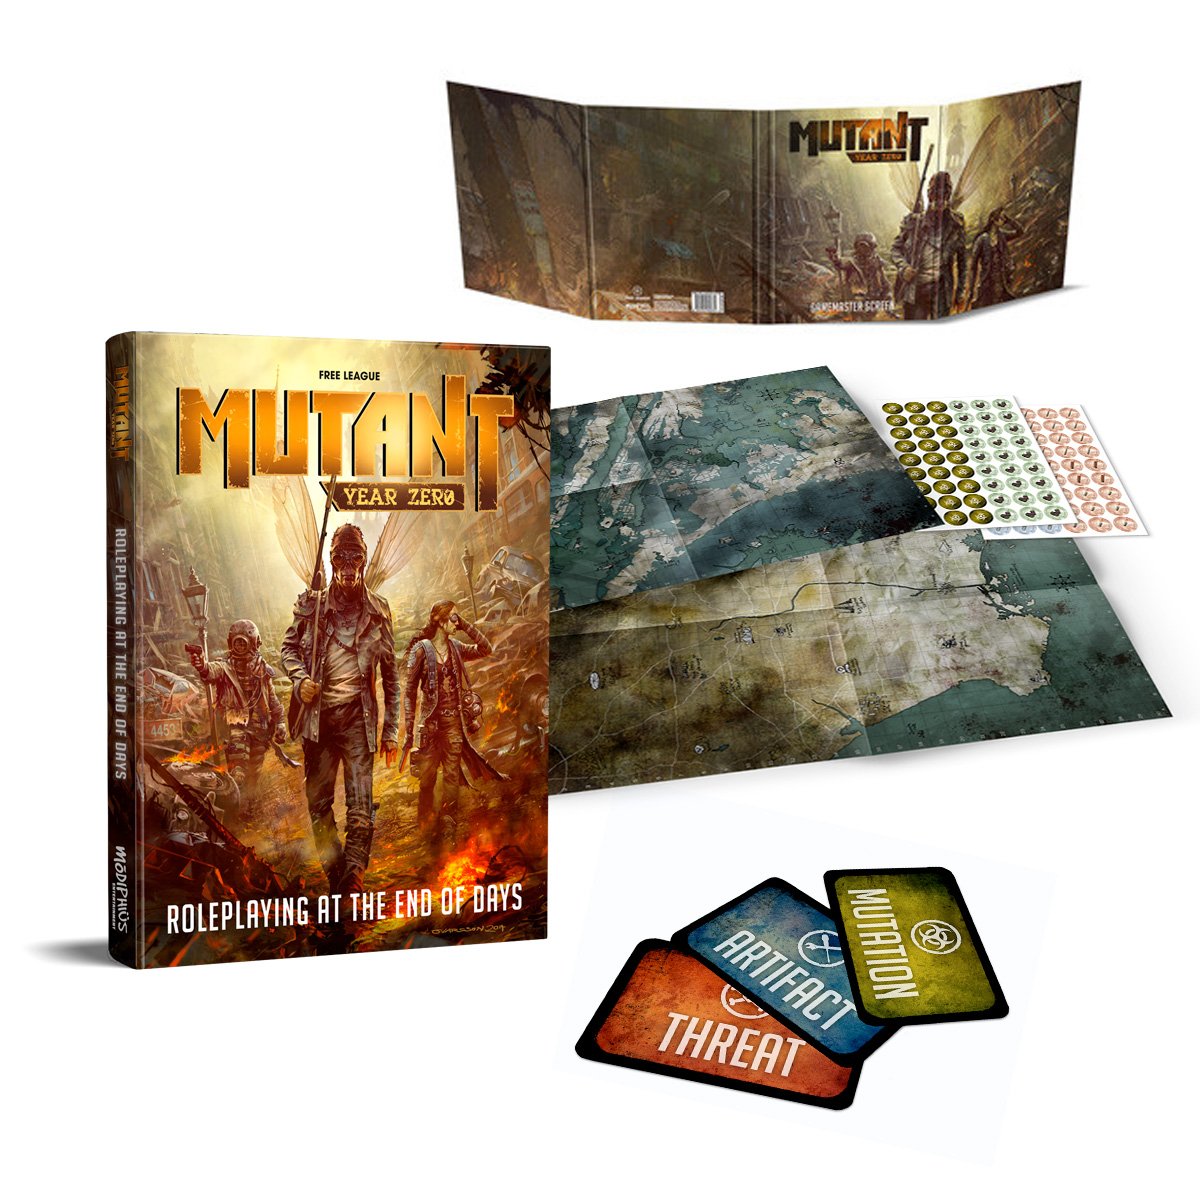 Mutant: Year Zero Review (Board Games) - Official GBAtemp Review